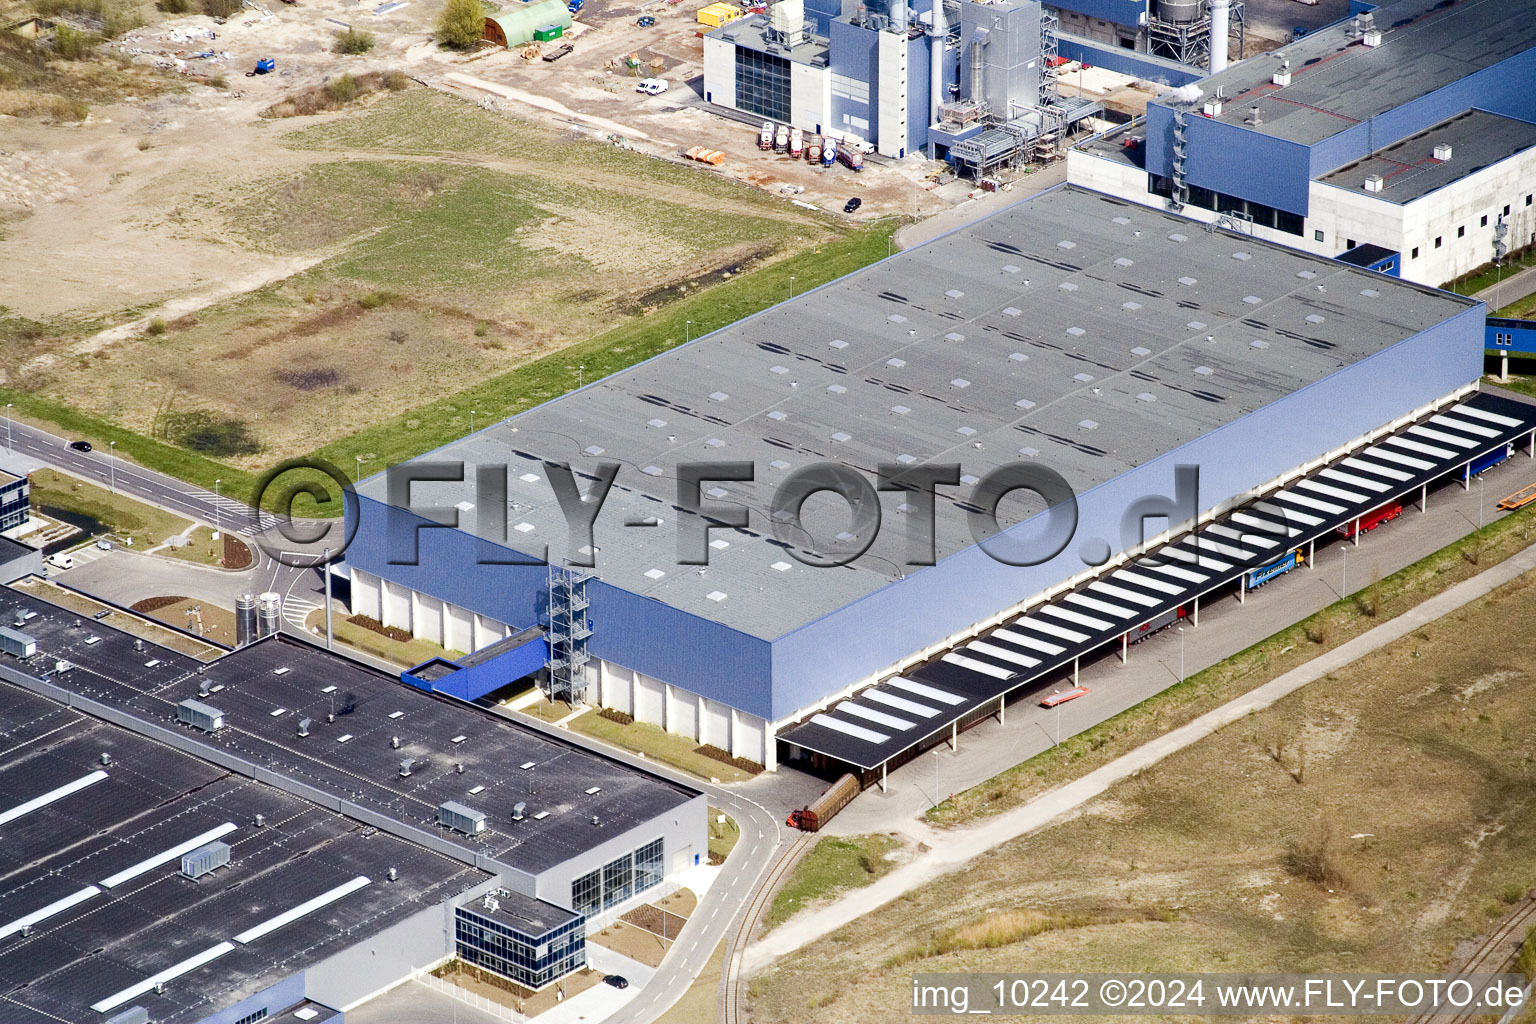 Building and production halls on the premises of Papierfabrik Palm GmbH & Co. KG in the district Industriegebiet Woerth-Oberwald in Woerth am Rhein in the state Rhineland-Palatinate, Germany